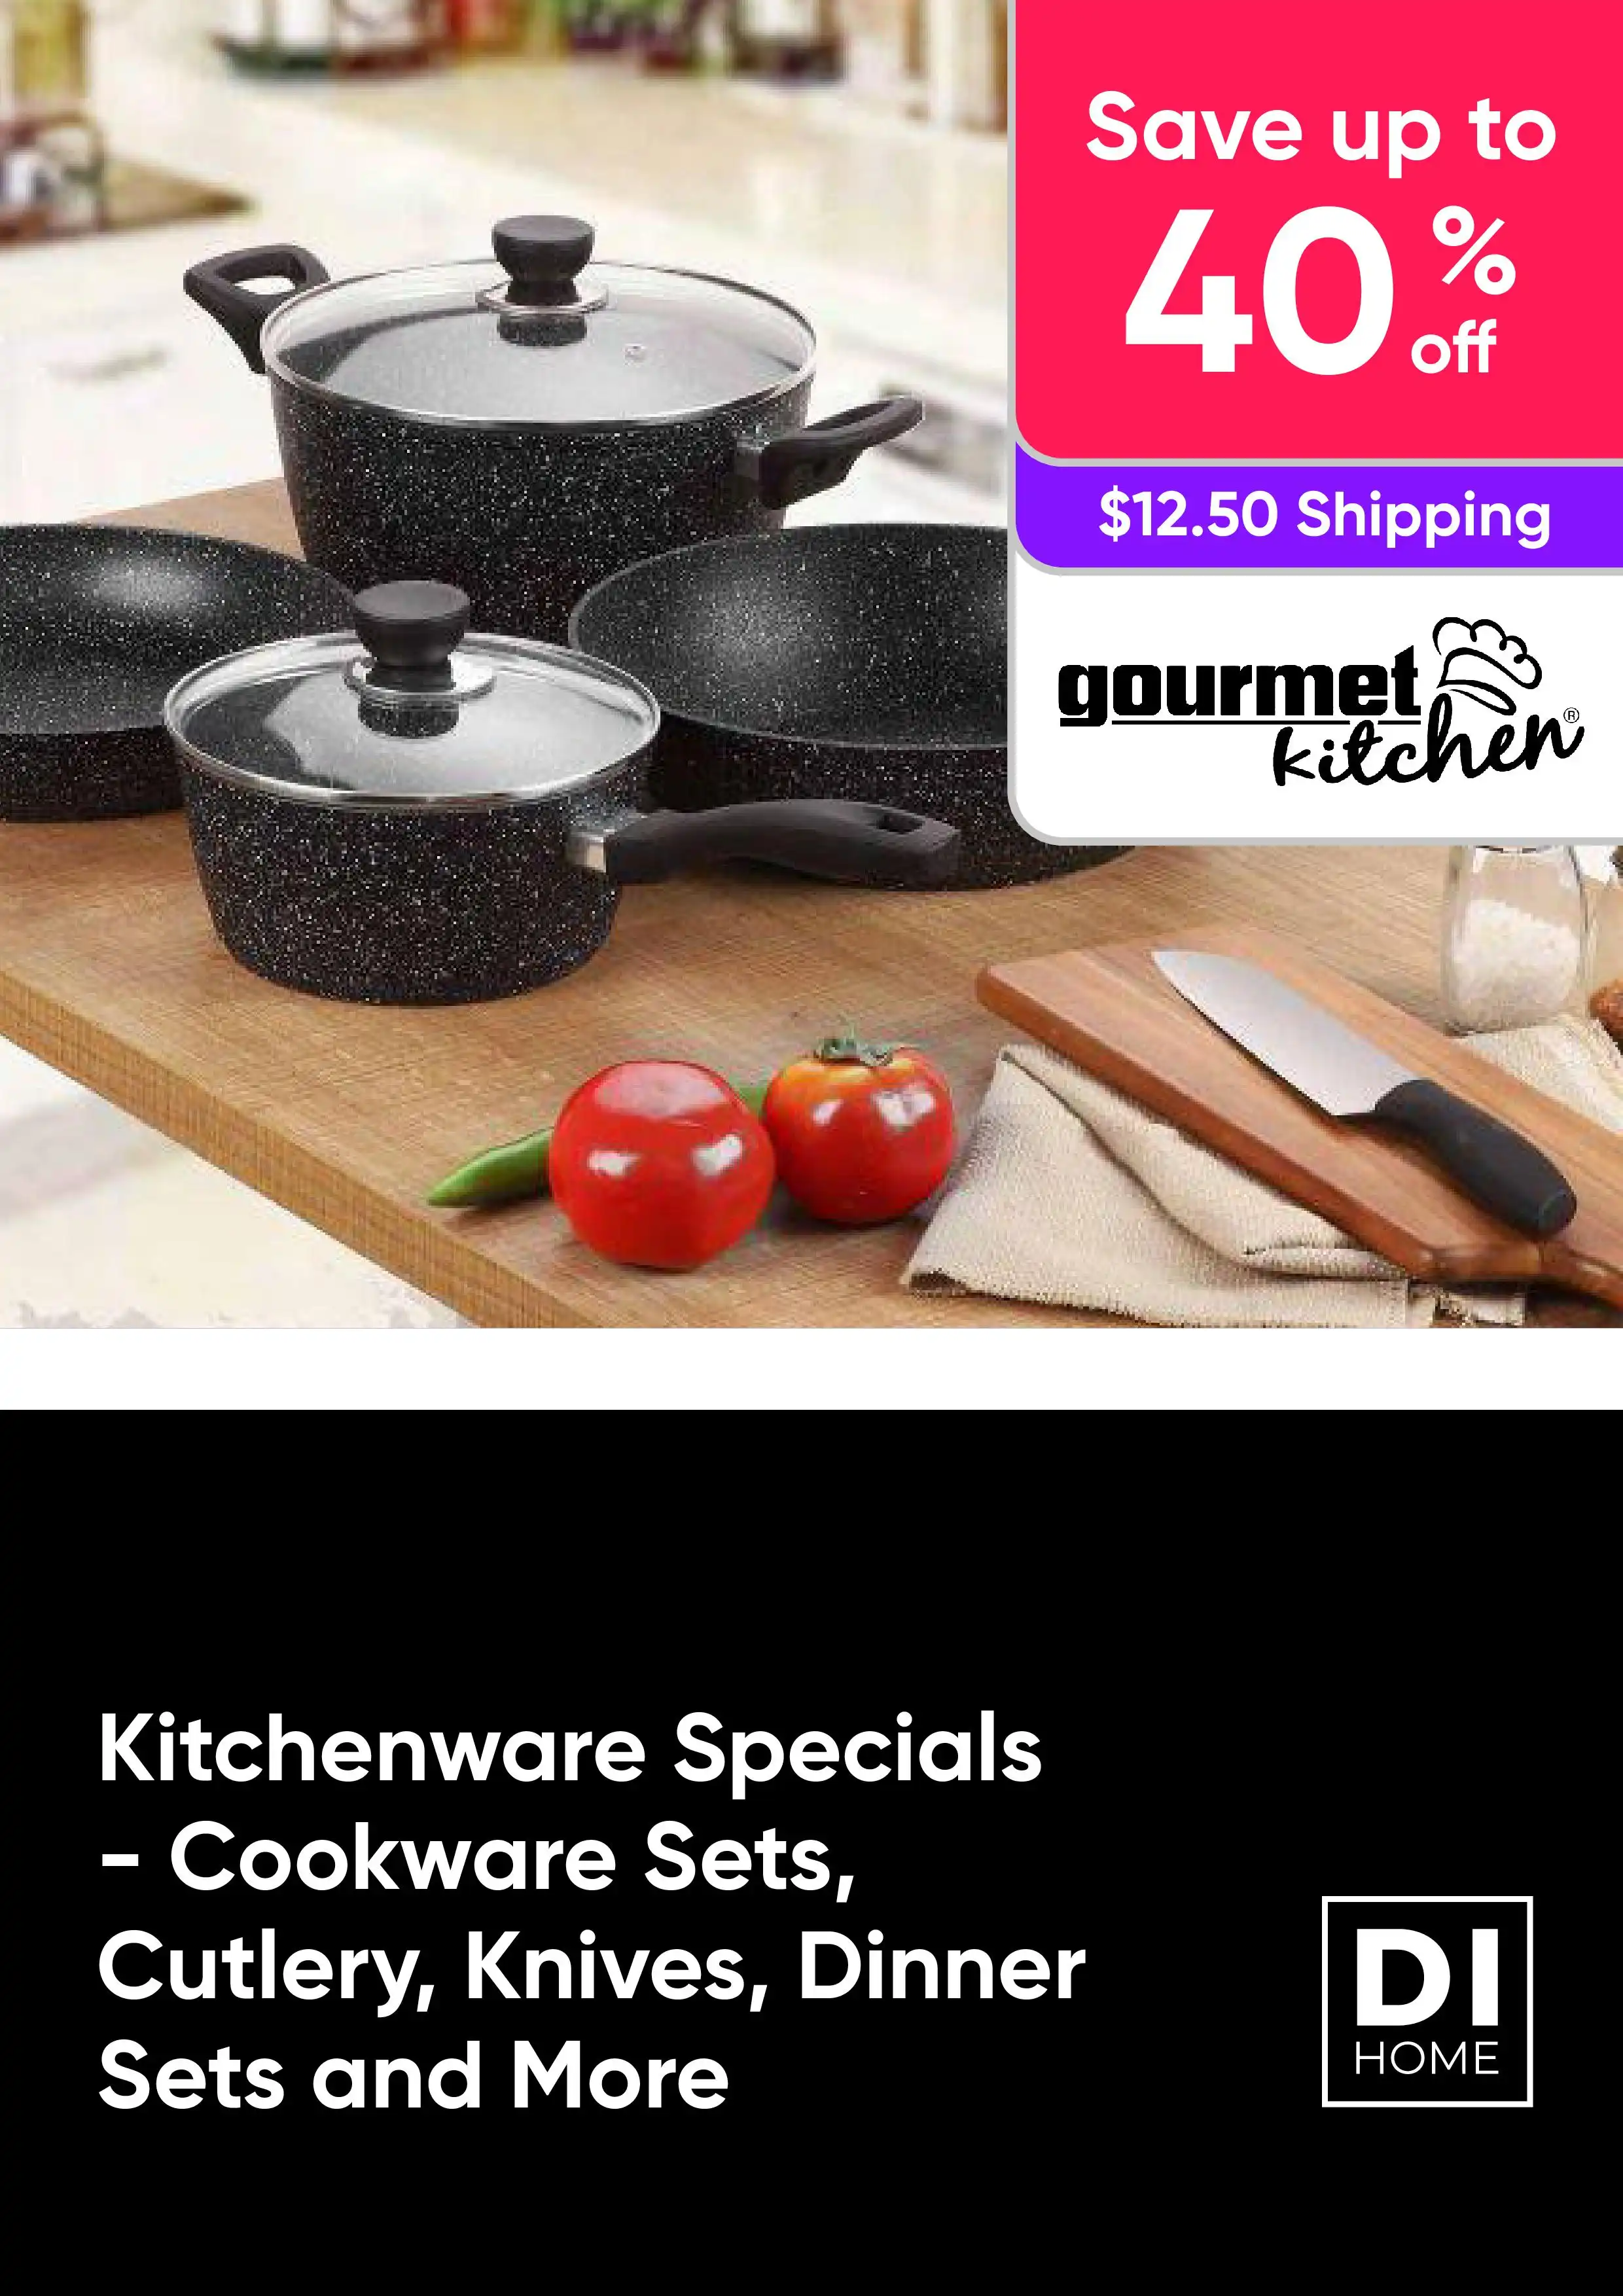 Kitchenware Specials - Cookware Sets, Cutlery, Knives, Dinner Sets and More - Save up to 40% off